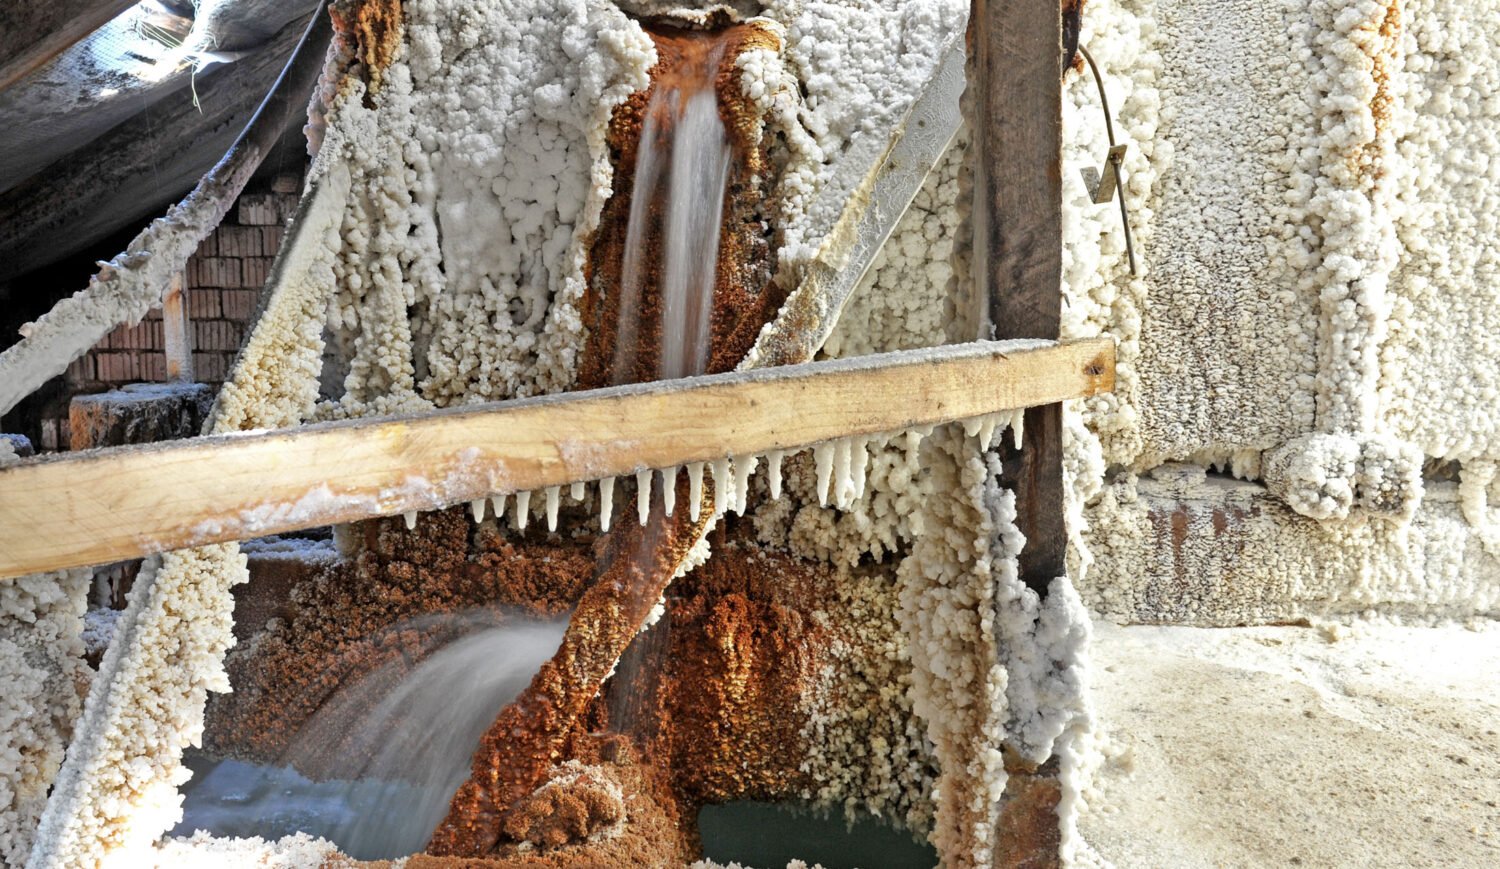 The Luisenhall salt works is Europe's only remaining pan salt works where salt is still produced as it was one hundred and fifty years ago © Göttingen Tourism and Marketing / Mischke